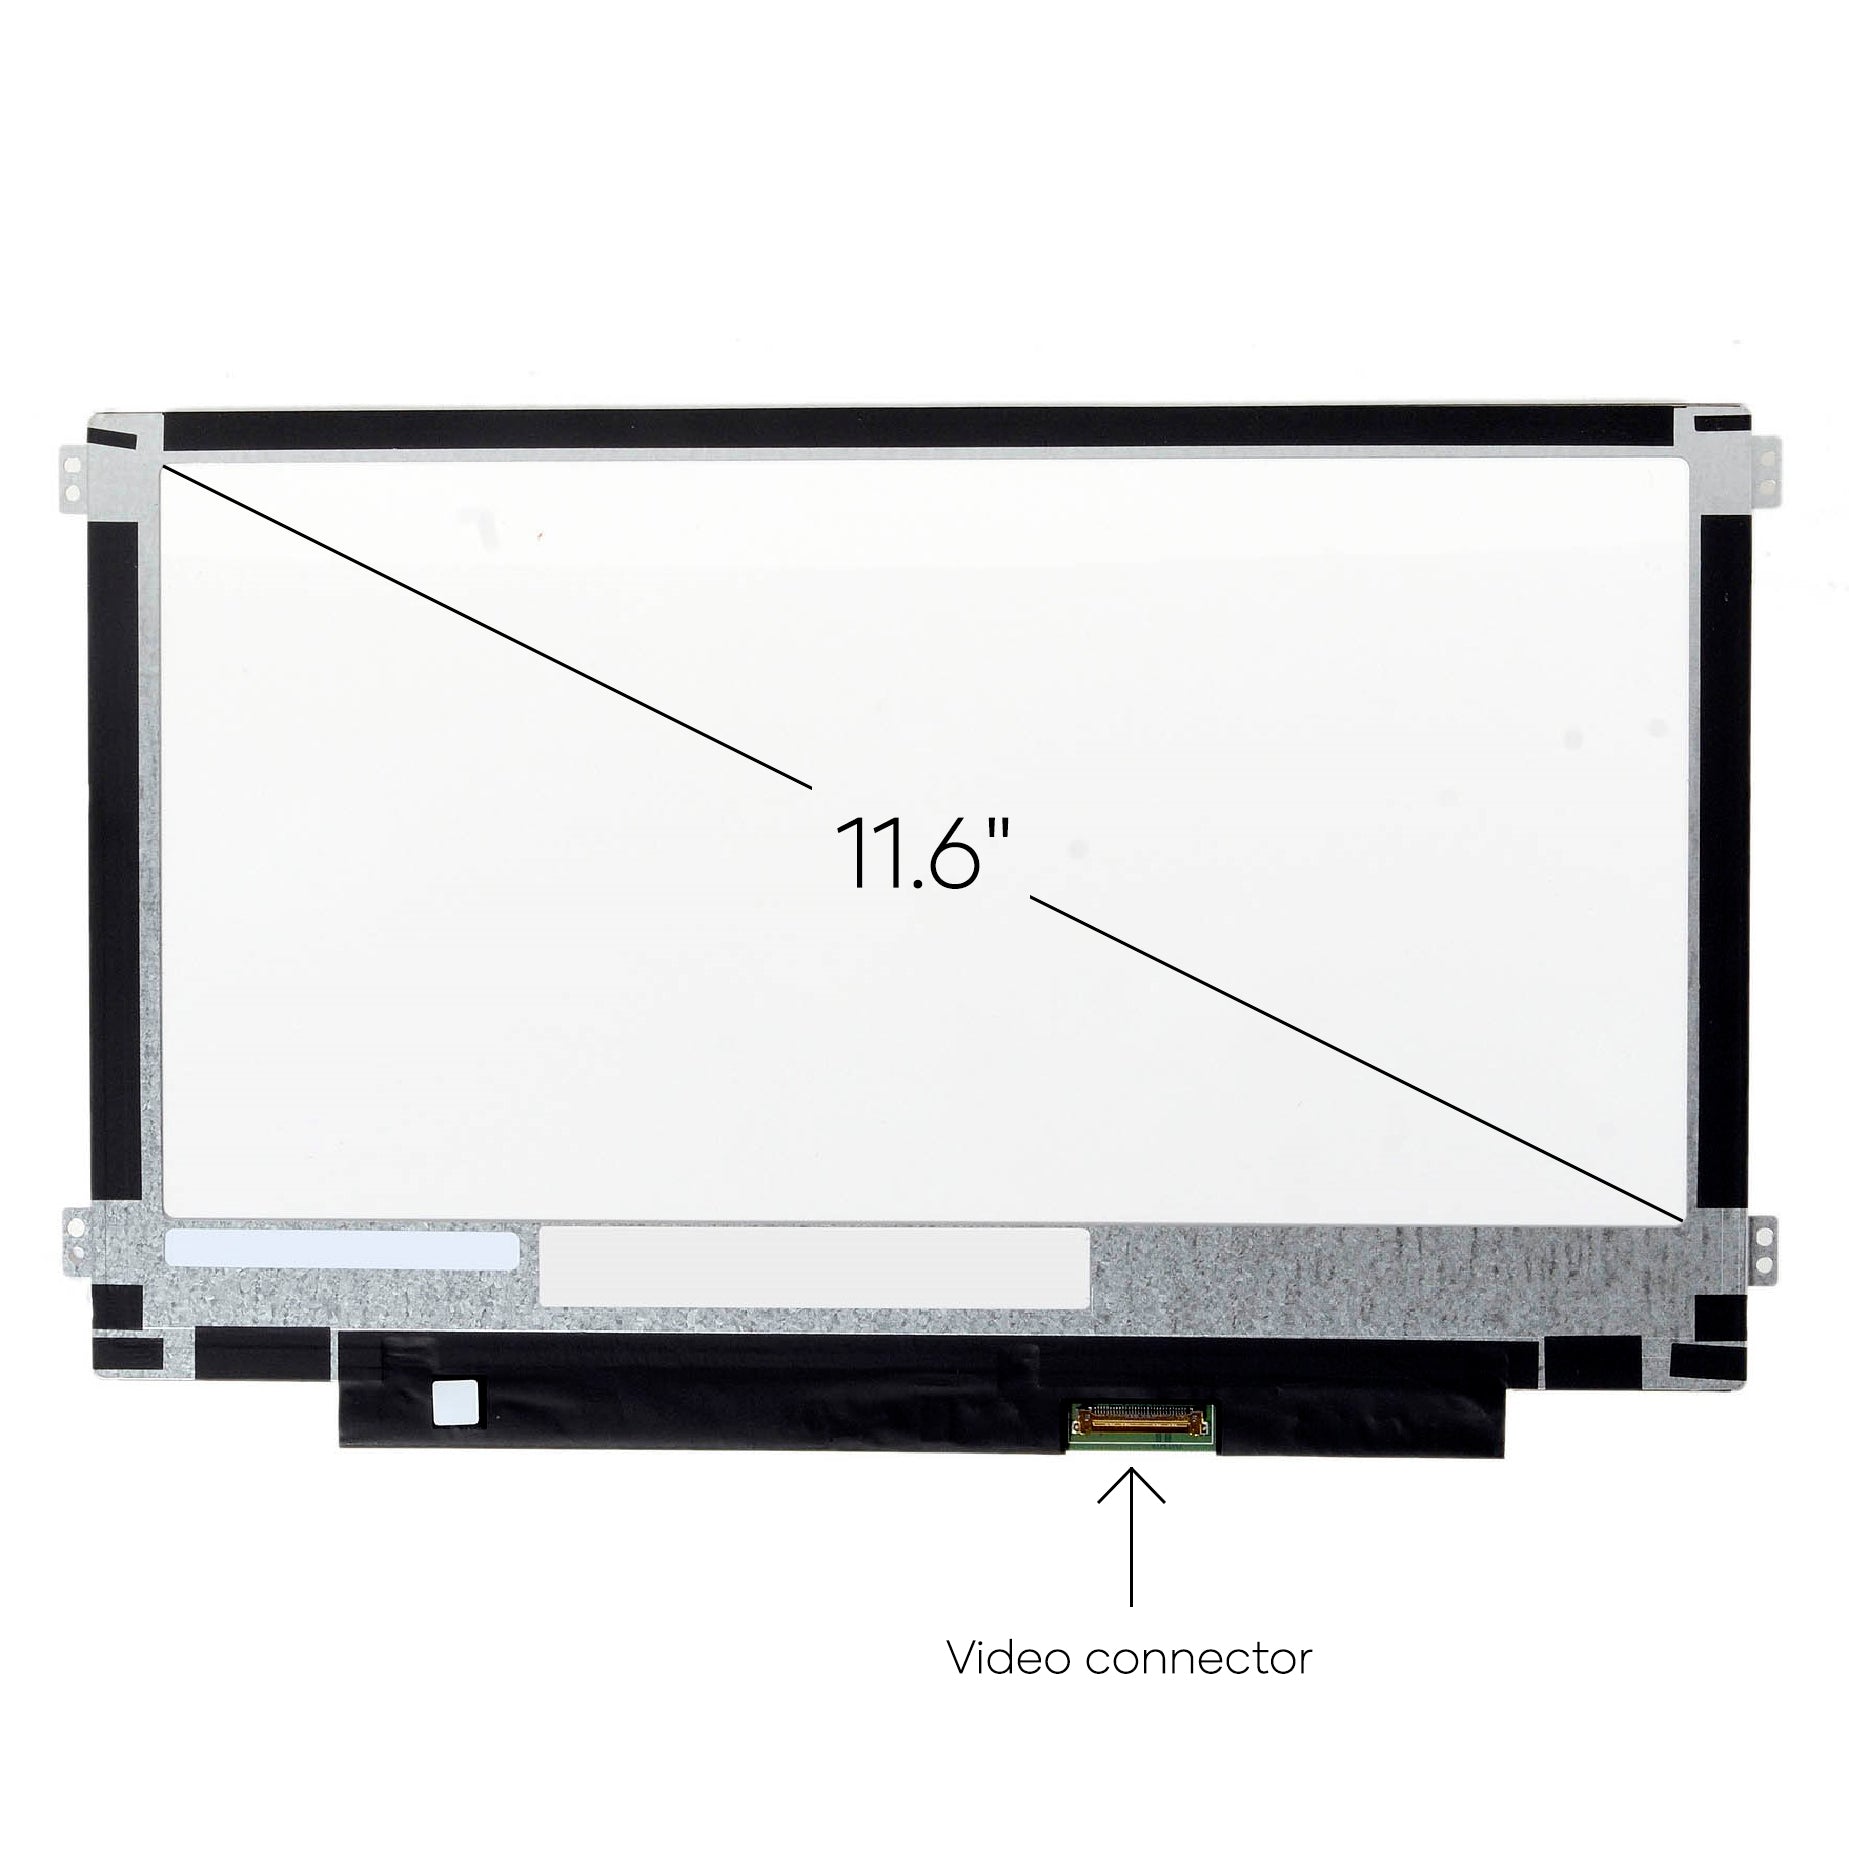 Screen Replacement for Samsung Chromebook XE500C13-K03US HD 1366x768 Matte LCD LED Display